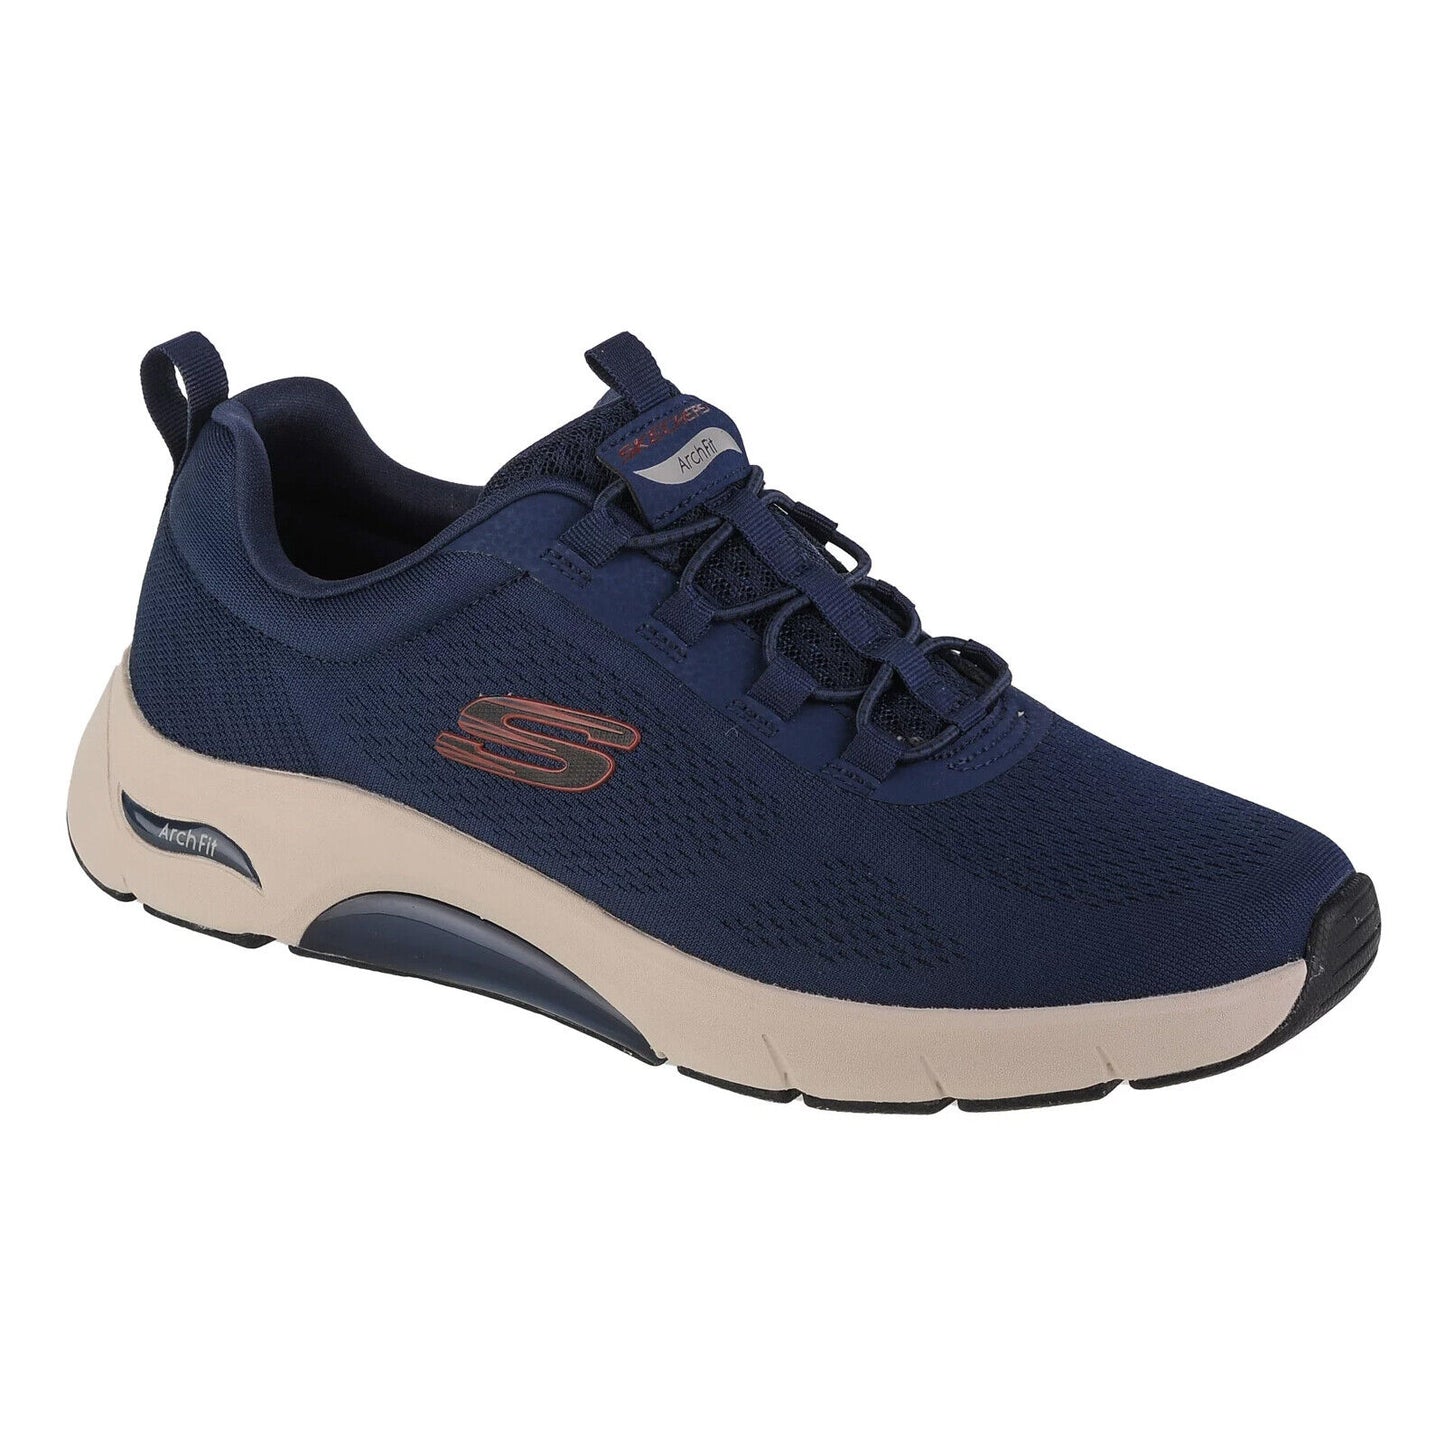 Skechers Mens Arch Fit Billo Navy Mesh Lightweight Vegan Trainers 232556/NVY